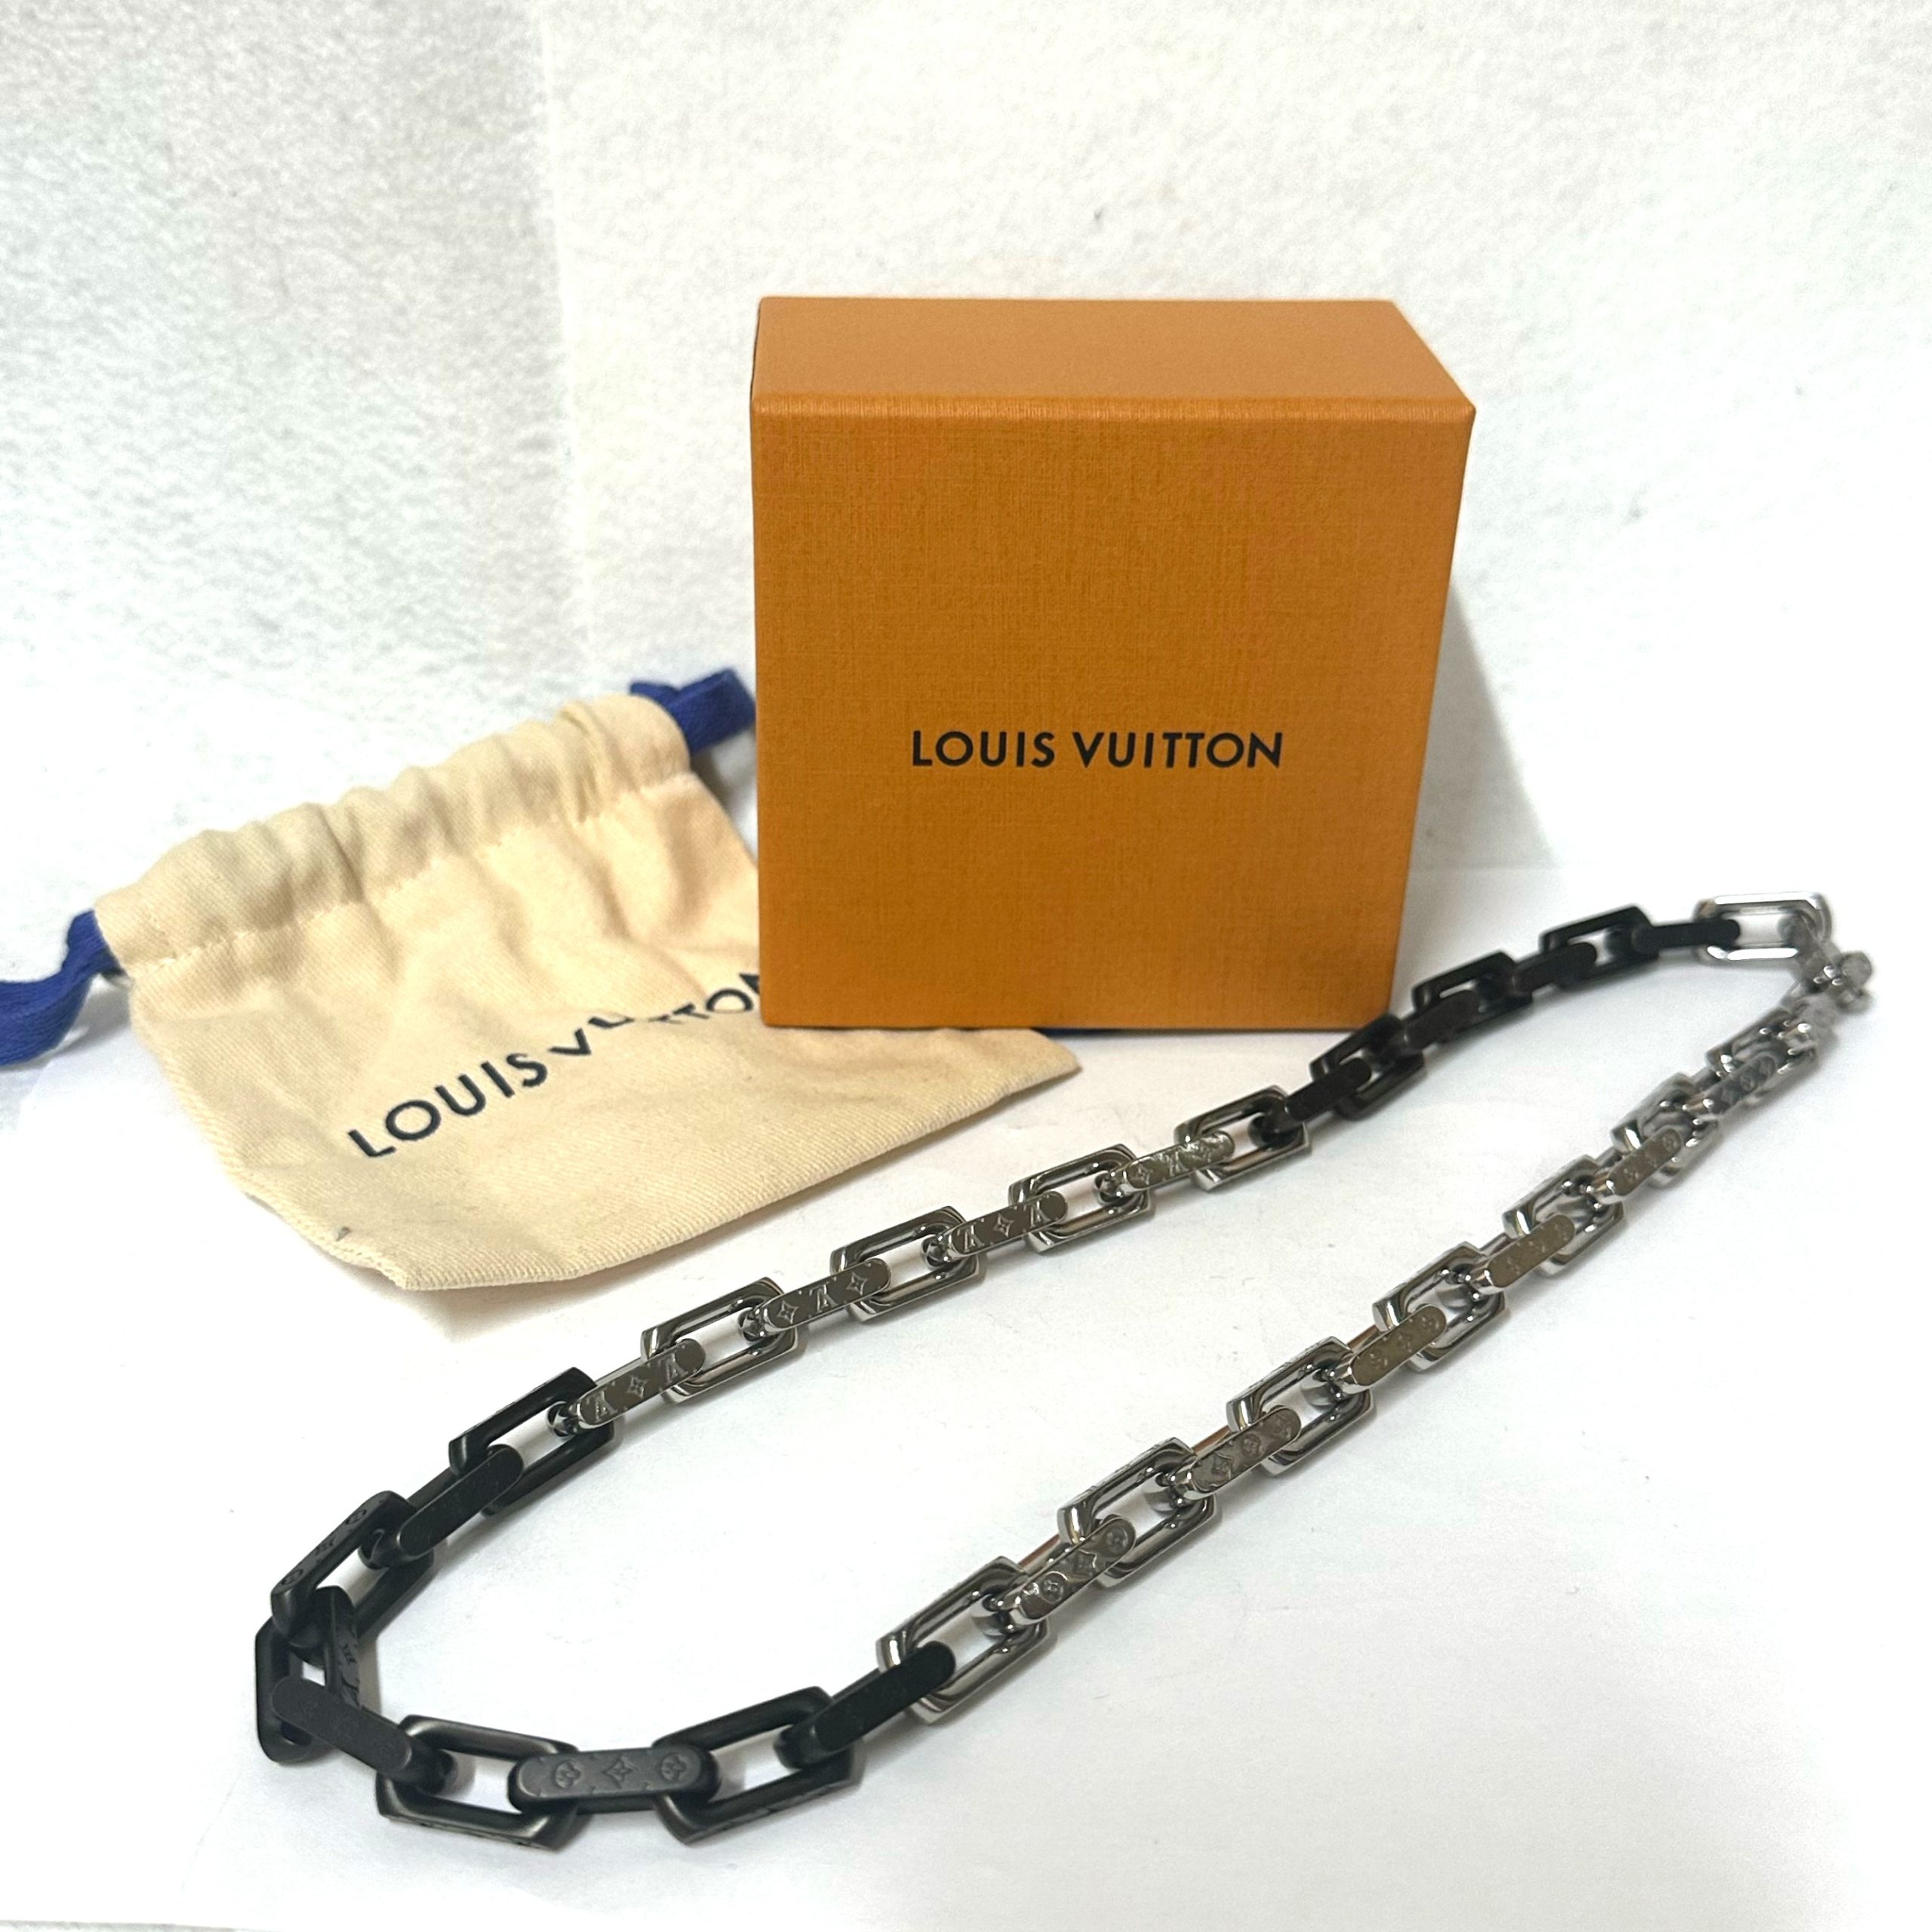 Louis Vuitton,ルイヴィトン,LV、チェーンネックレス,アクセサリー